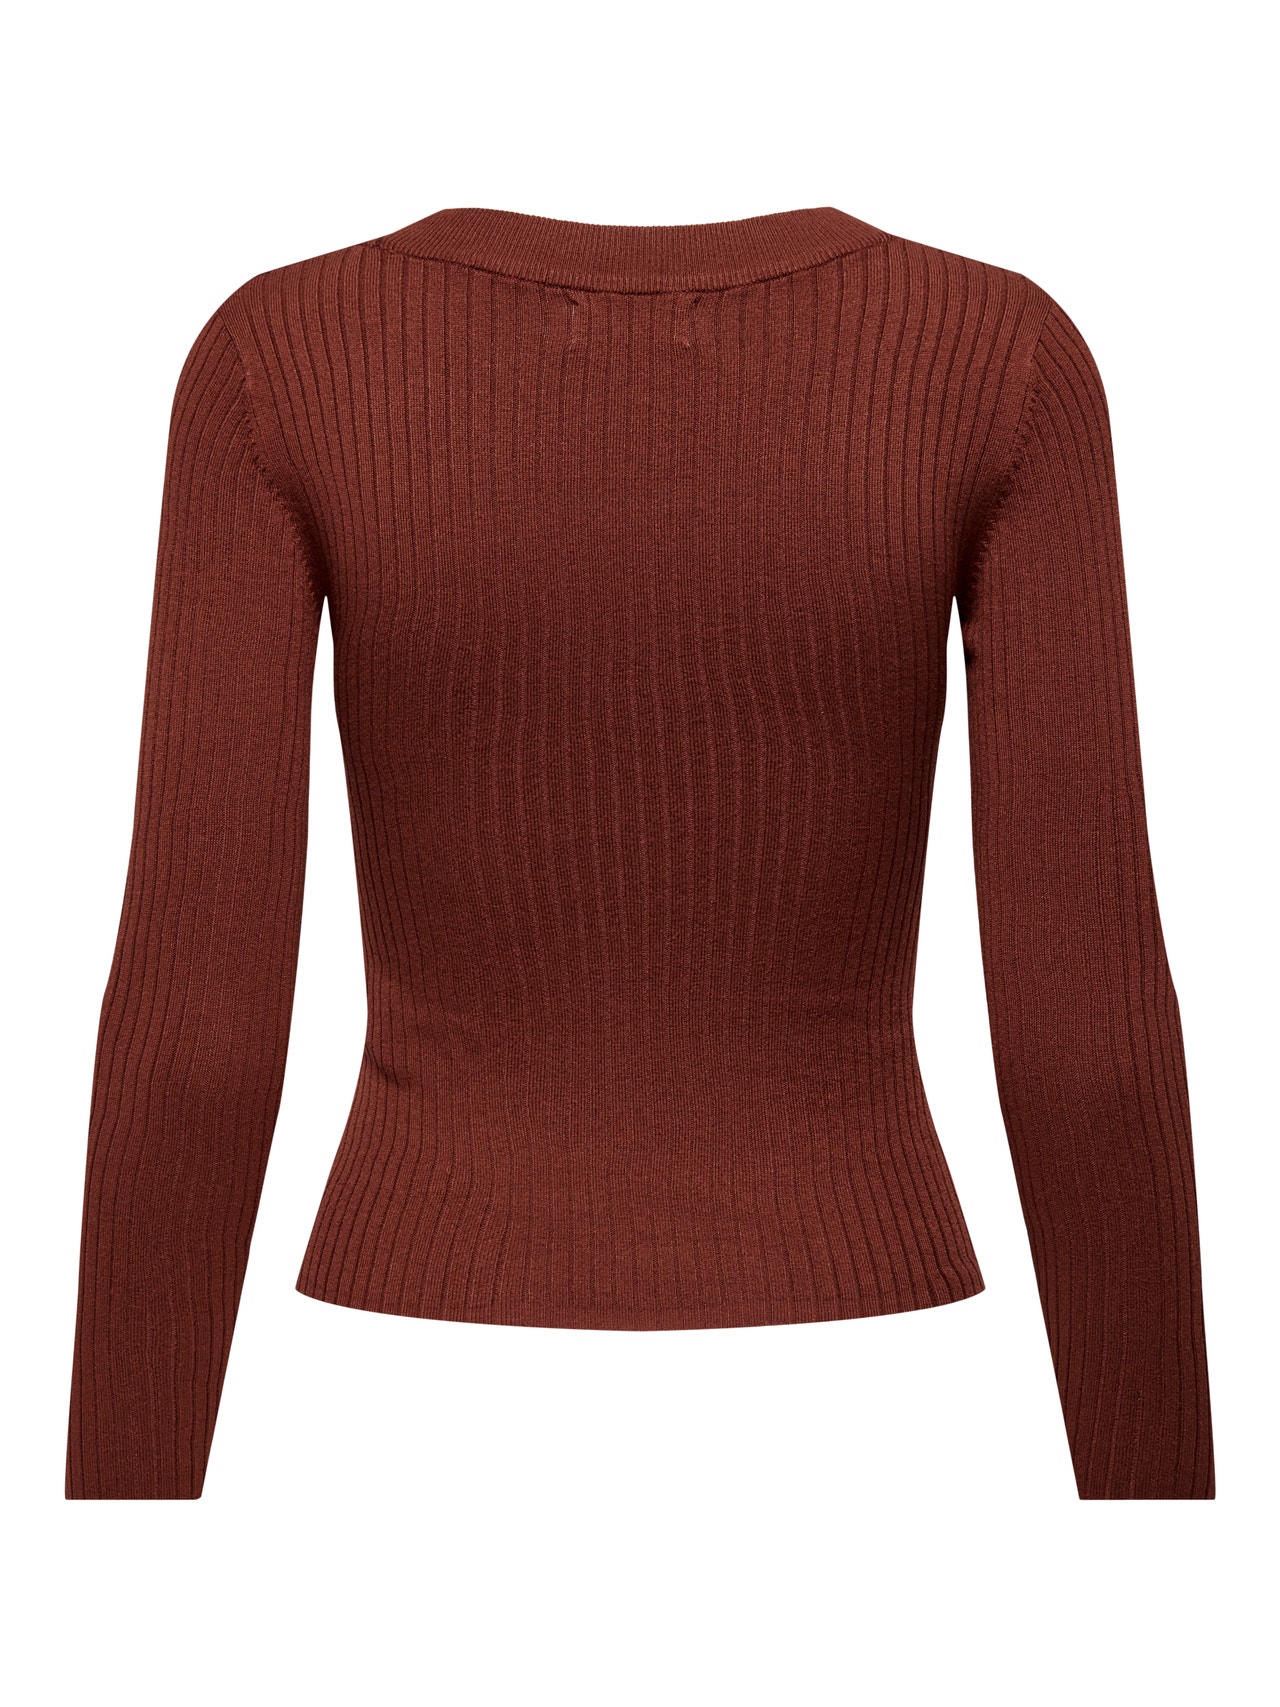 ONLY O-Neck Tall Pullover -Smoked Paprika - 15278867